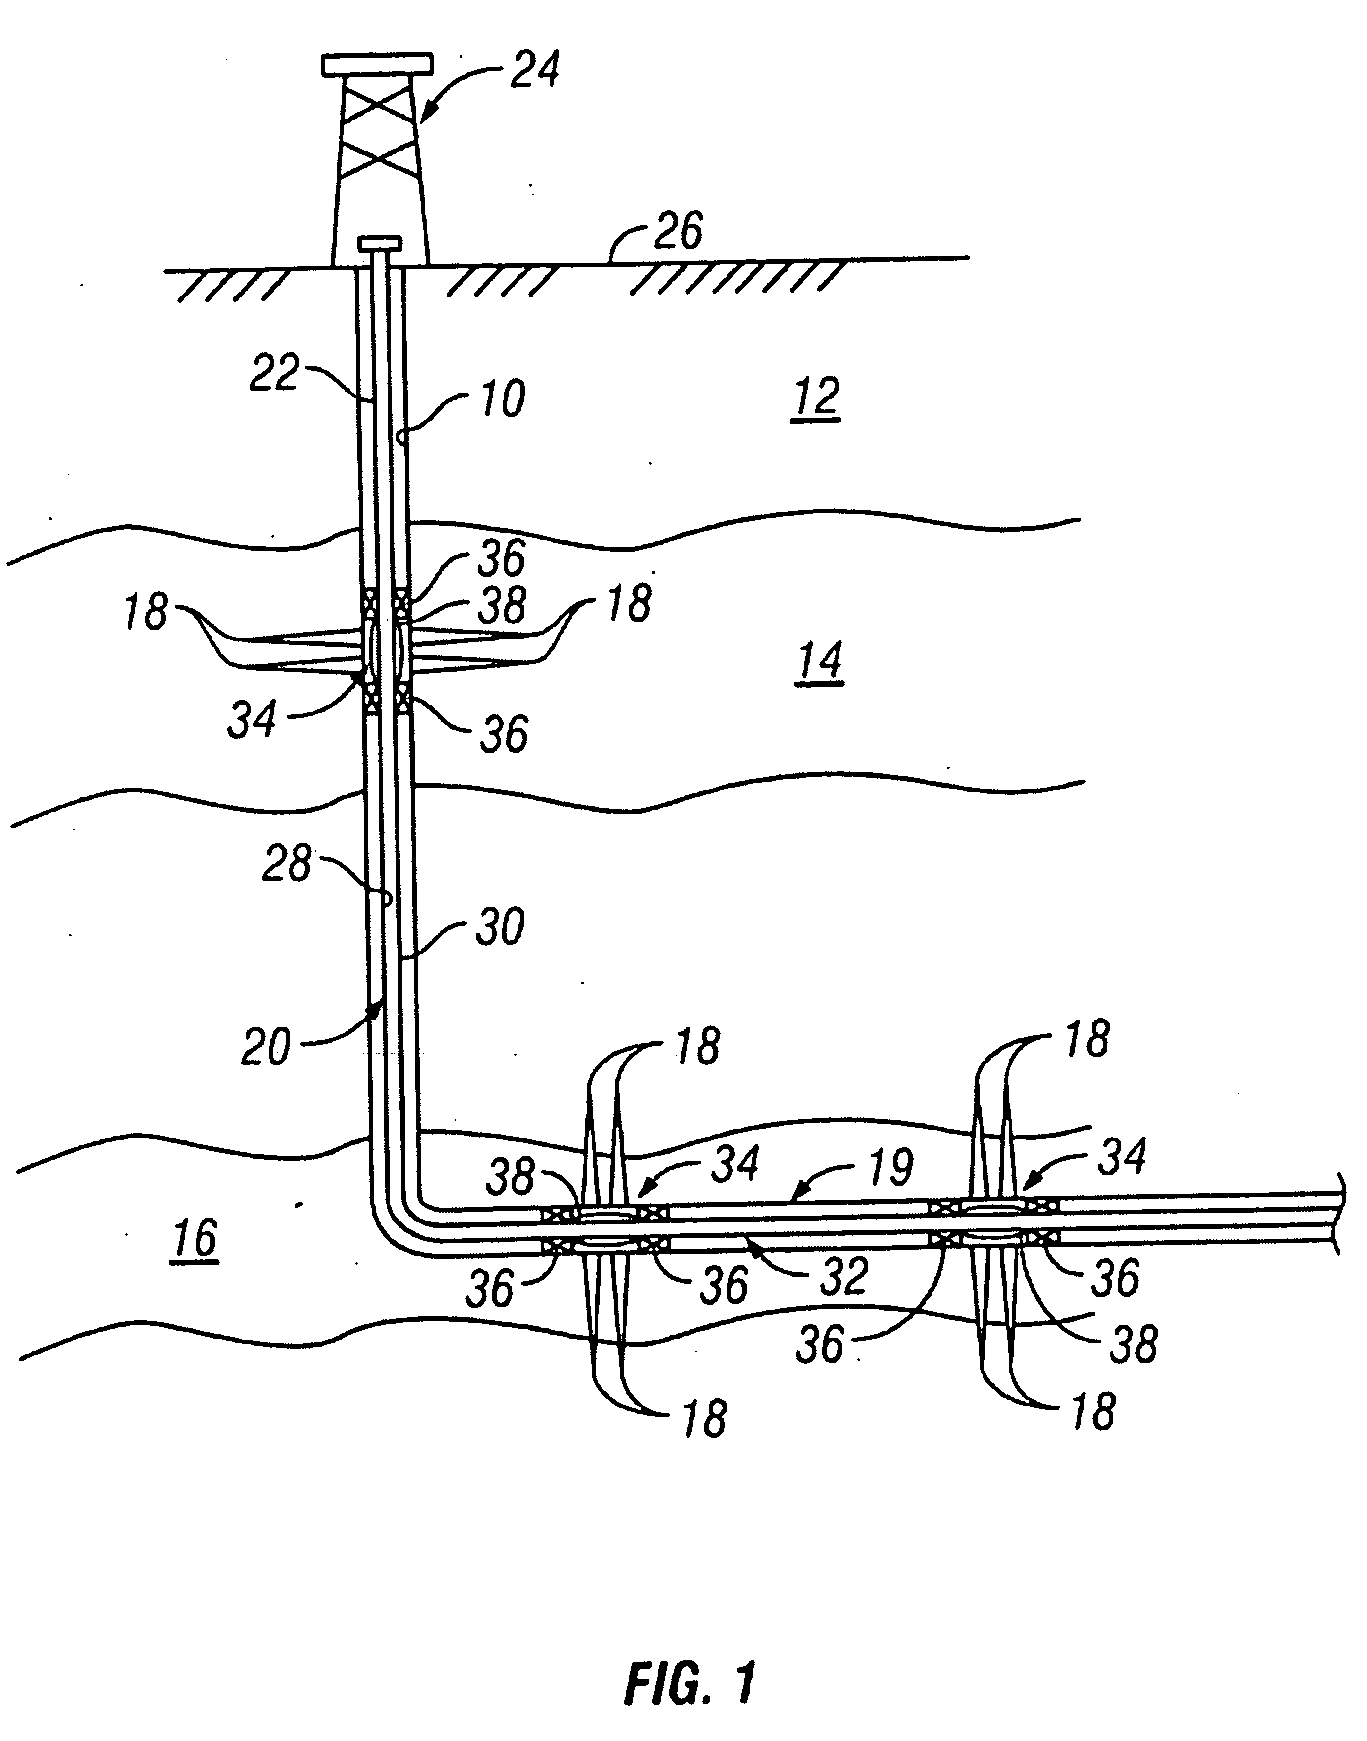 Reactive in-flow control device for subterranean wellbores